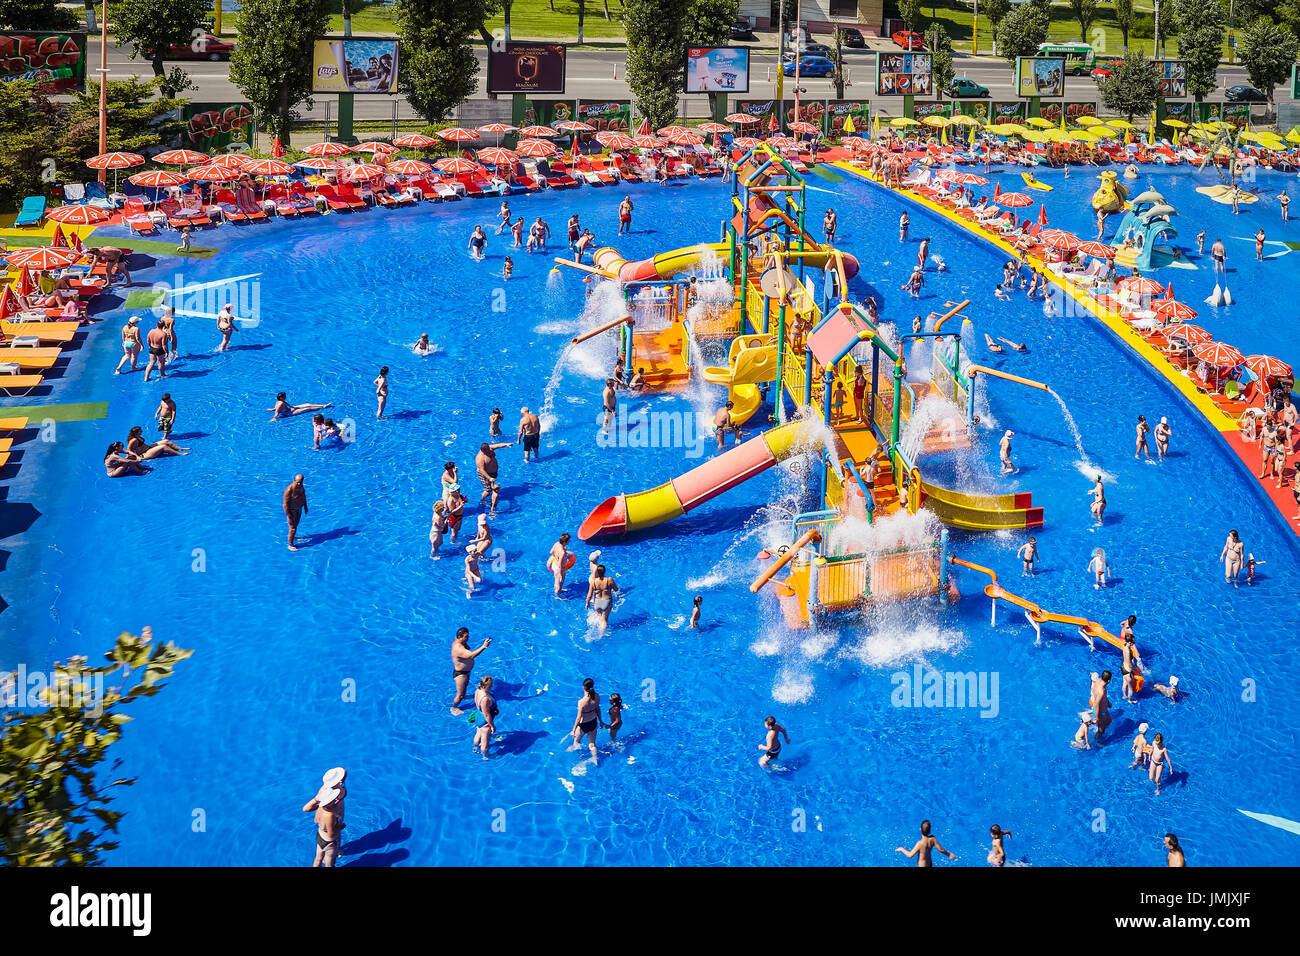 MAMAIA, ROMANIA - AUGUST 27, 2014: Colorful slides and pipes and blue swimming pool at Acqua Park in Mamaia, Romania, with an area of 4000 square fe Stock Photo